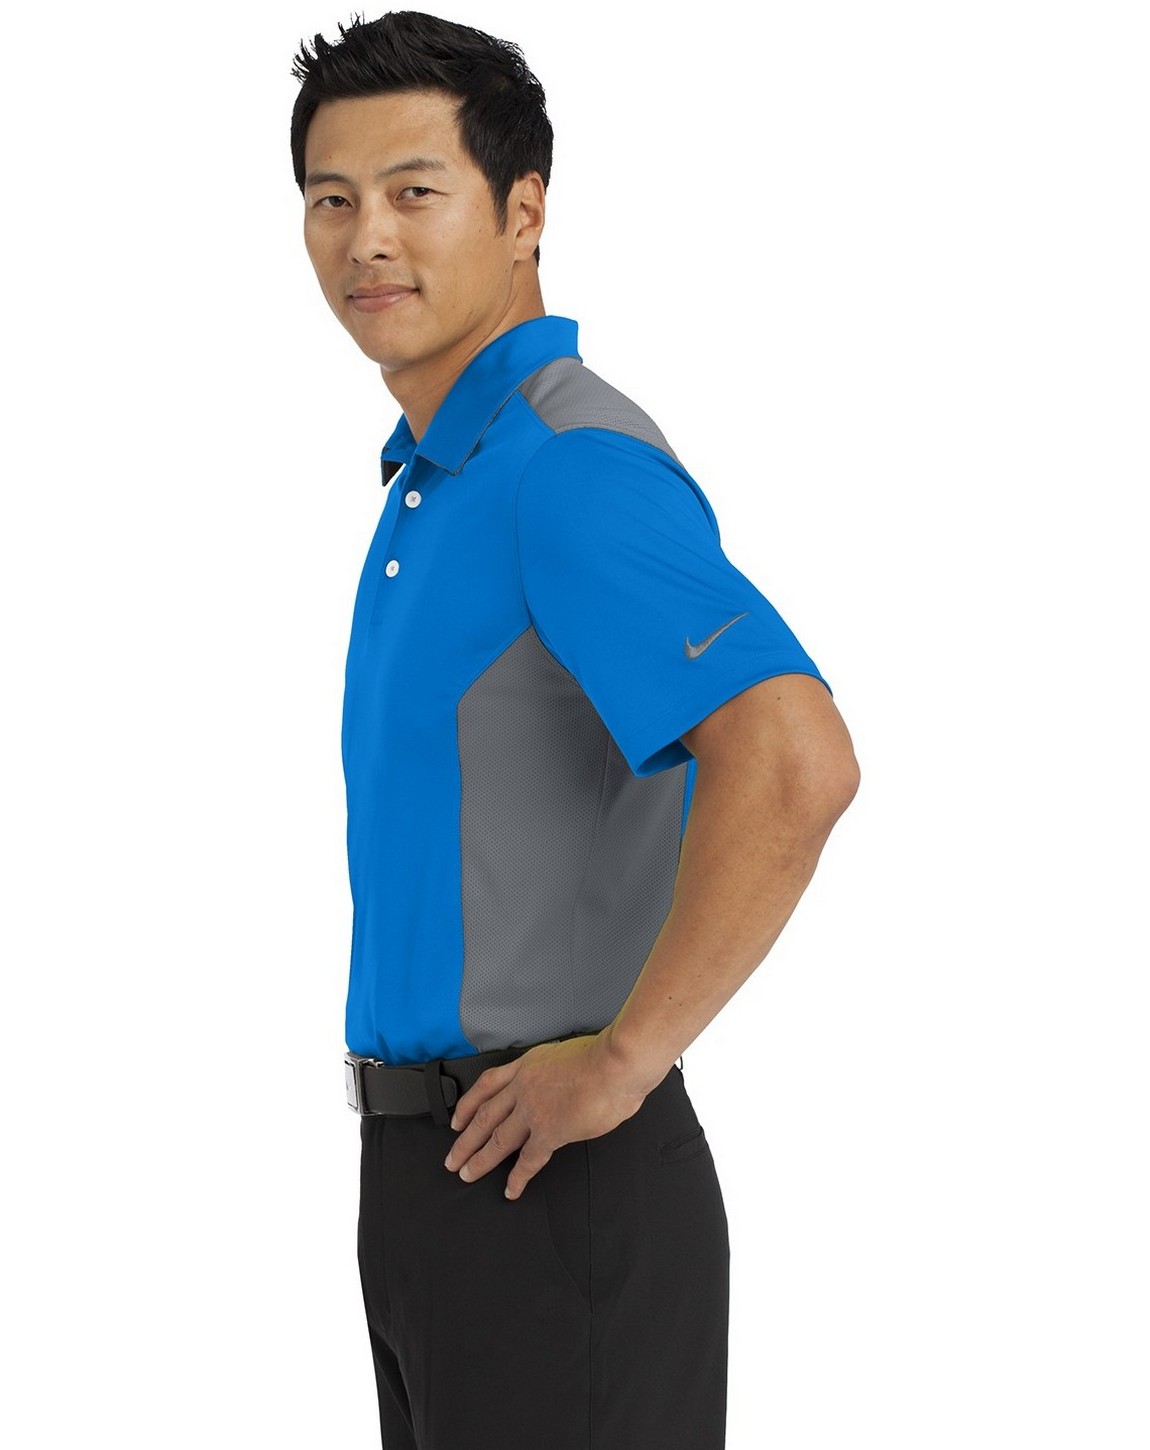 Nike Golf Dri FIT Logo Embroidered Engineered Mesh Polo at ApparelnBags.com